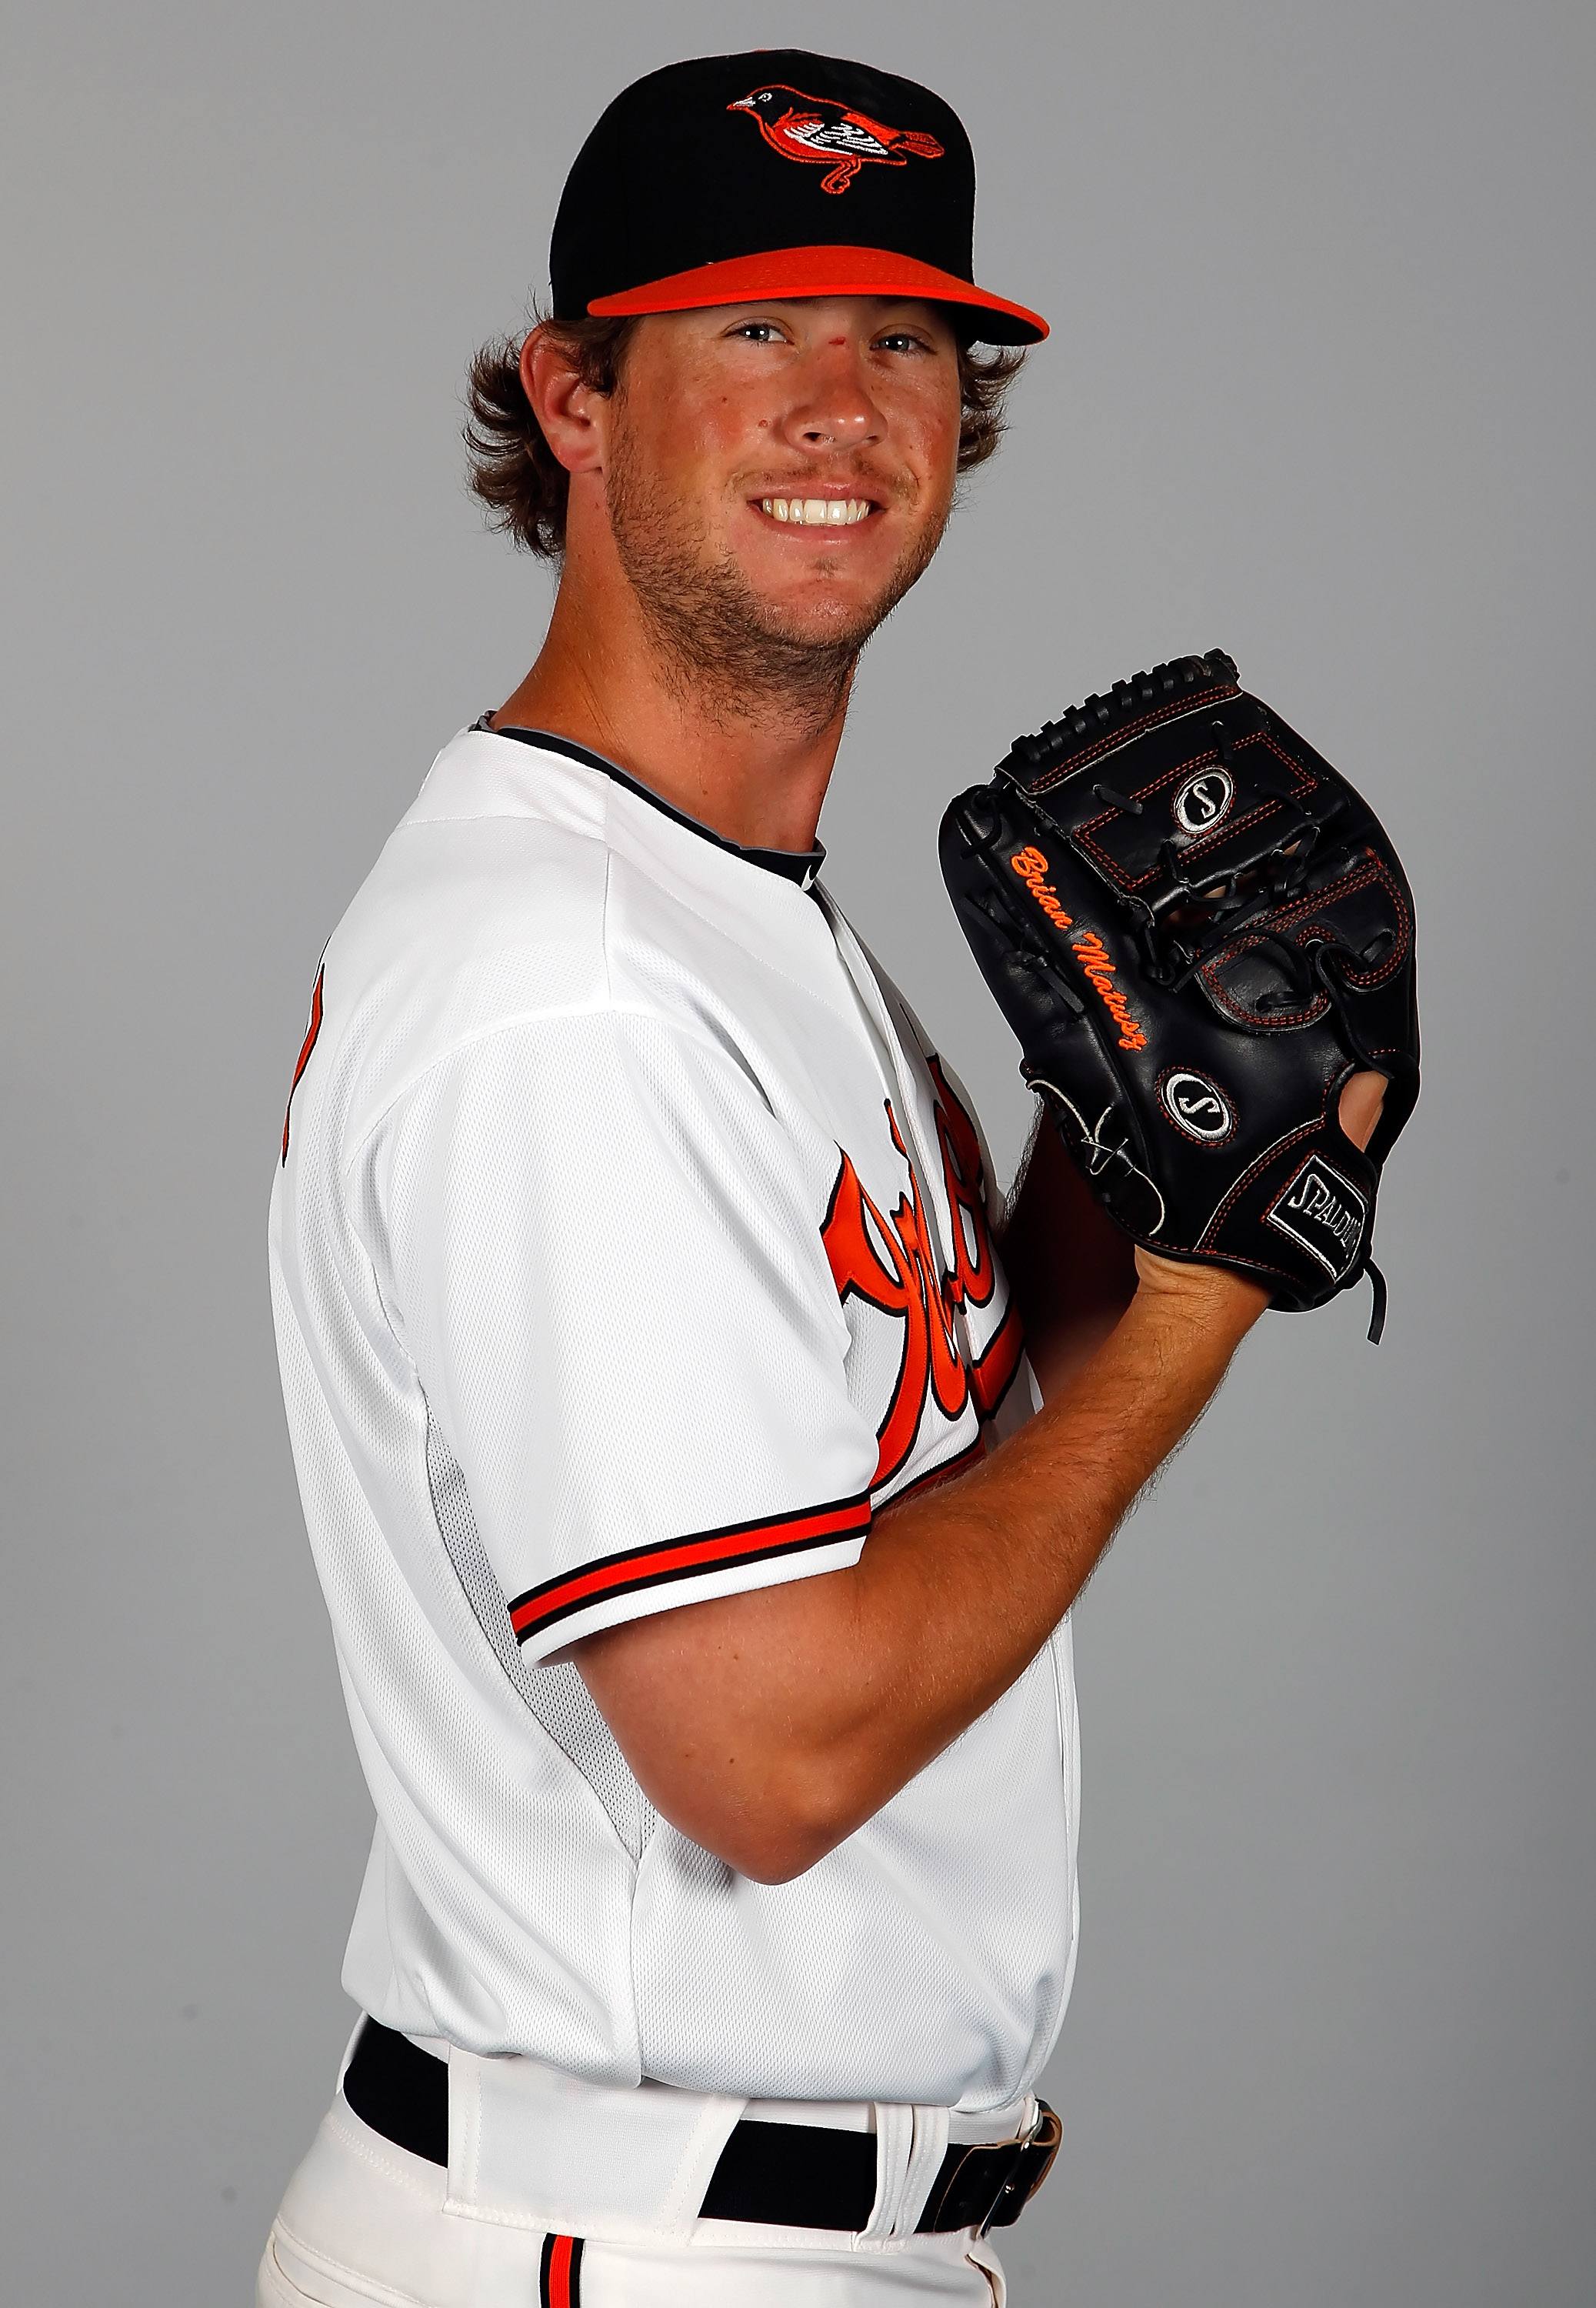 SARASOTA, FL - FEBRUARY 26:  Pitcher Brian Matusz #17 of the Baltimore Orioles poses for a photo during photo day at Ed Smith Stadium on February 26, 2011 in Sarasota, Florida.  (Photo by J. Meric/Getty Images)